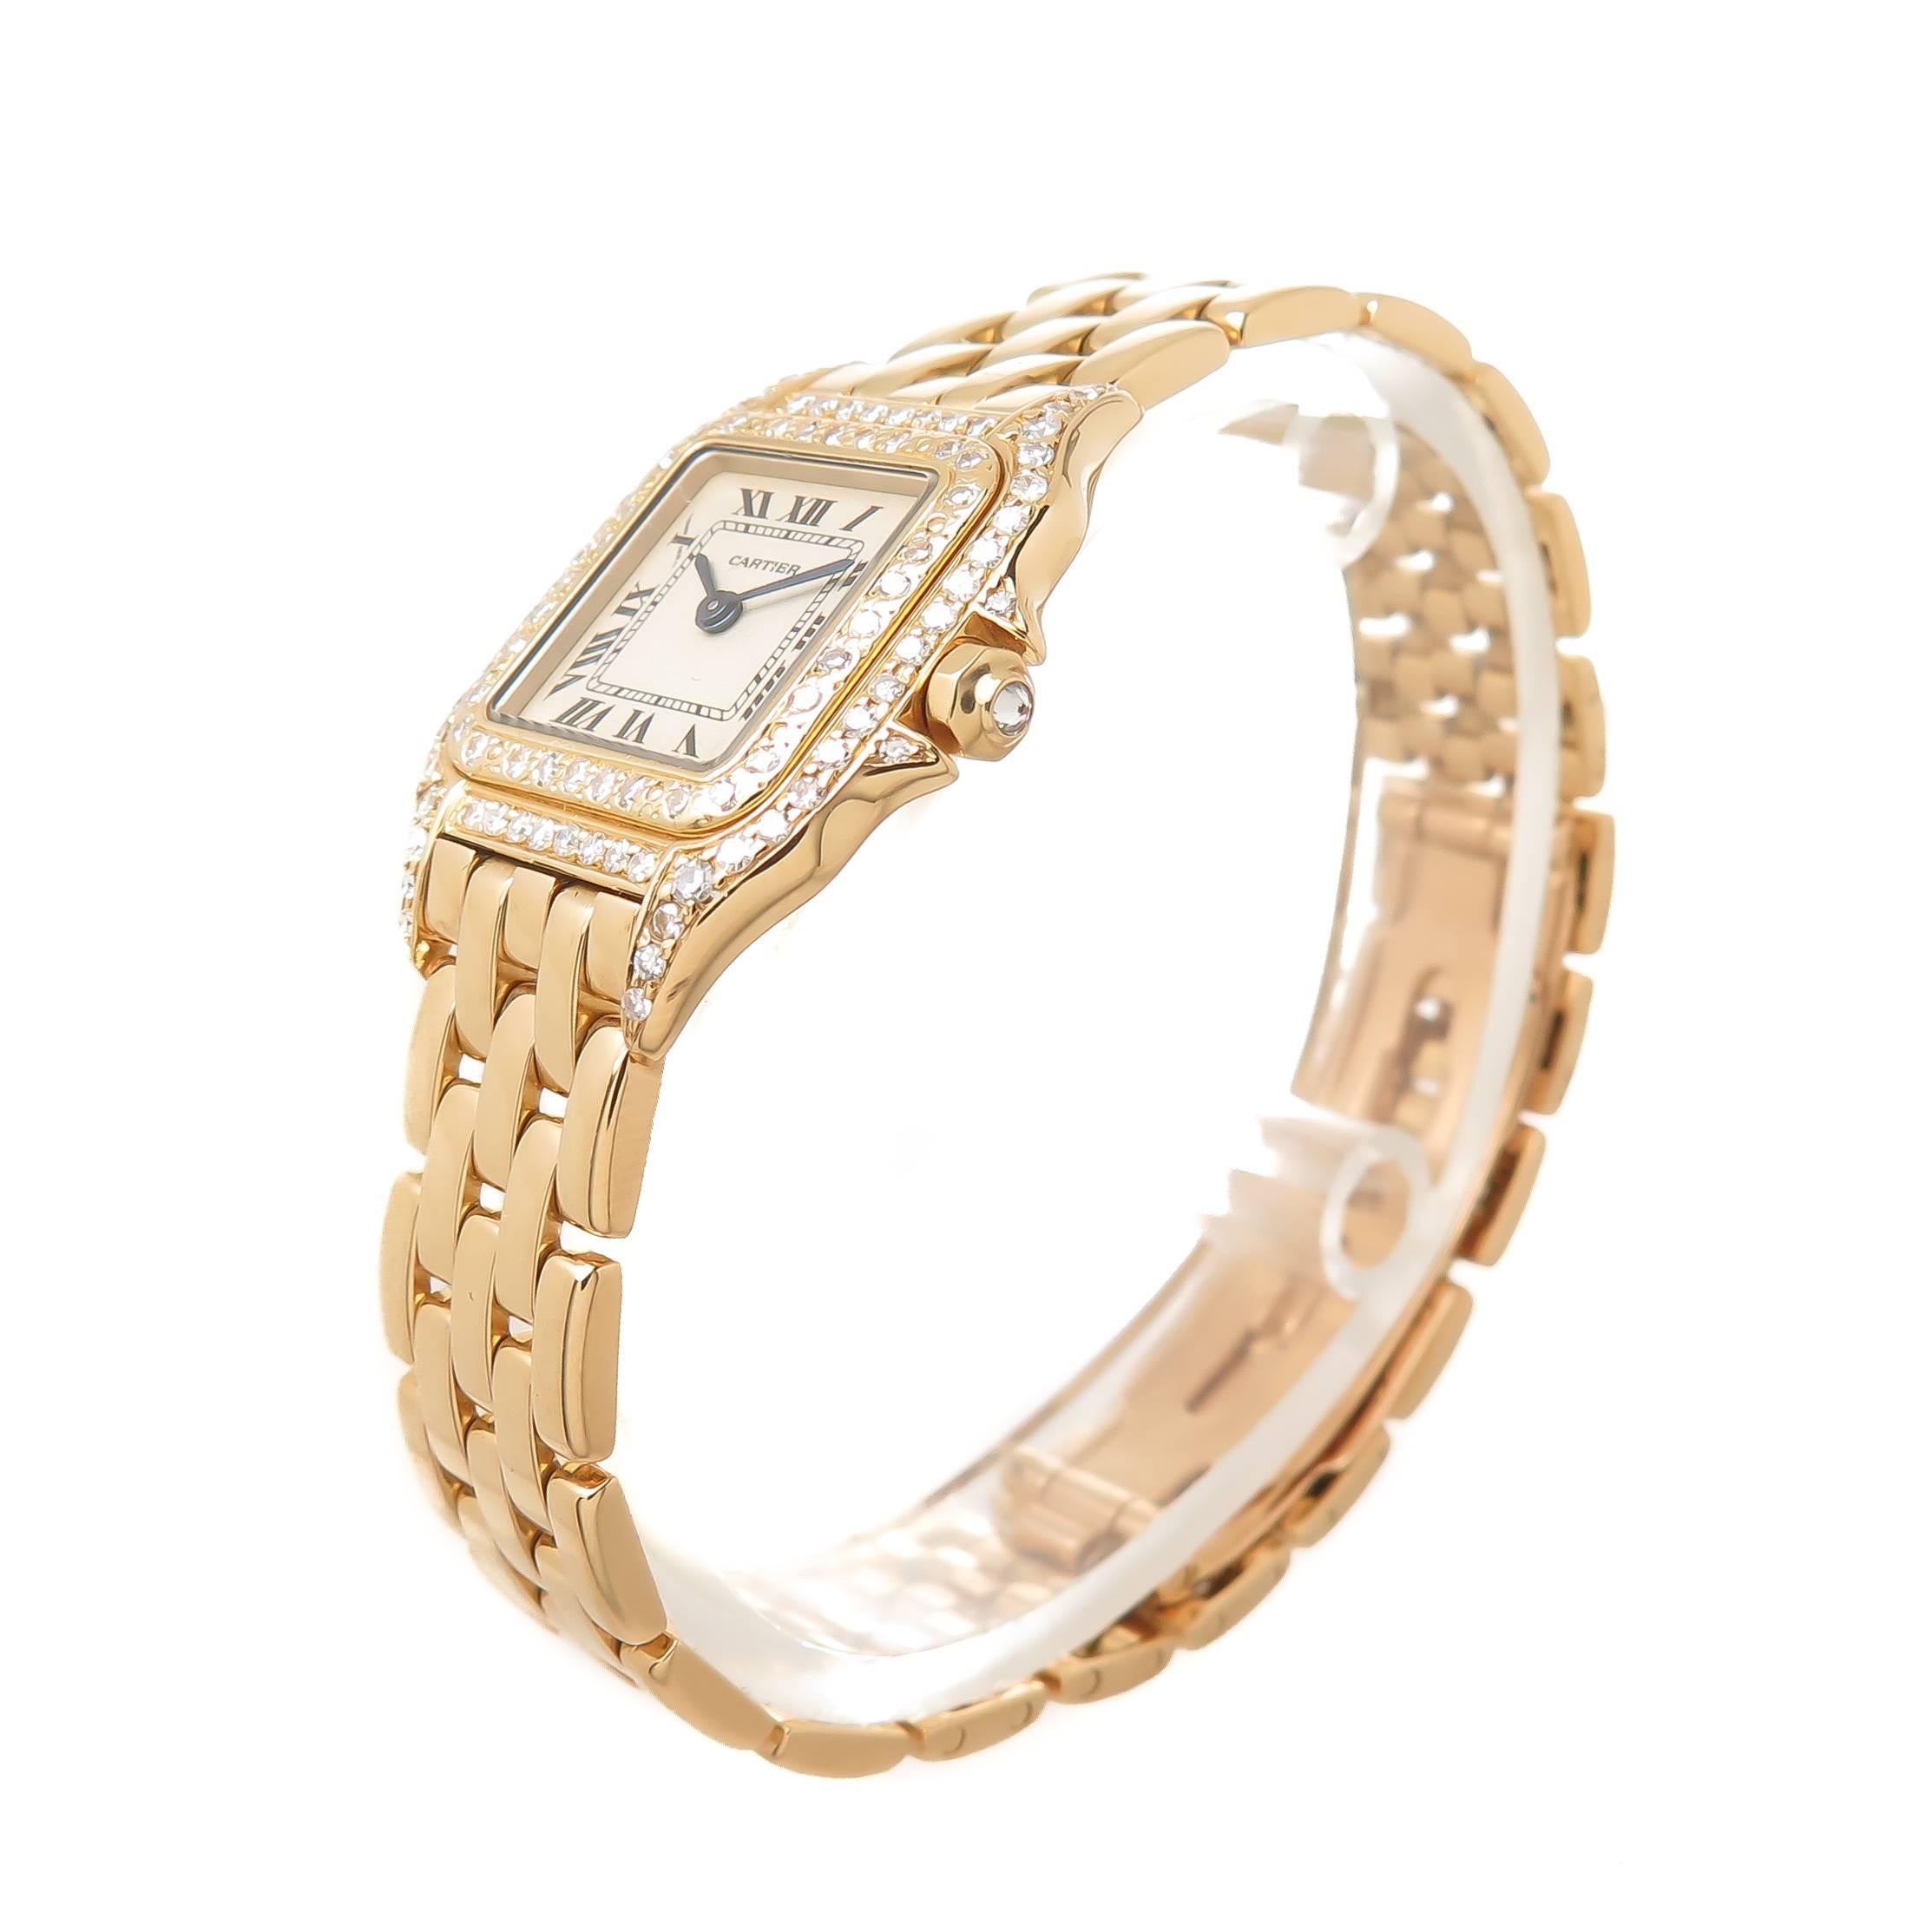 Circa 1990s Cartier Panther collection Ladies Wrist watch 30 X 22 MM 18K yellow Gold Case. The Bezel, Case top and crown are all Cartier Factory set with Round Brilliant cut Diamonds totaling approximately 1.50 Carat. Quartz movement, White dial